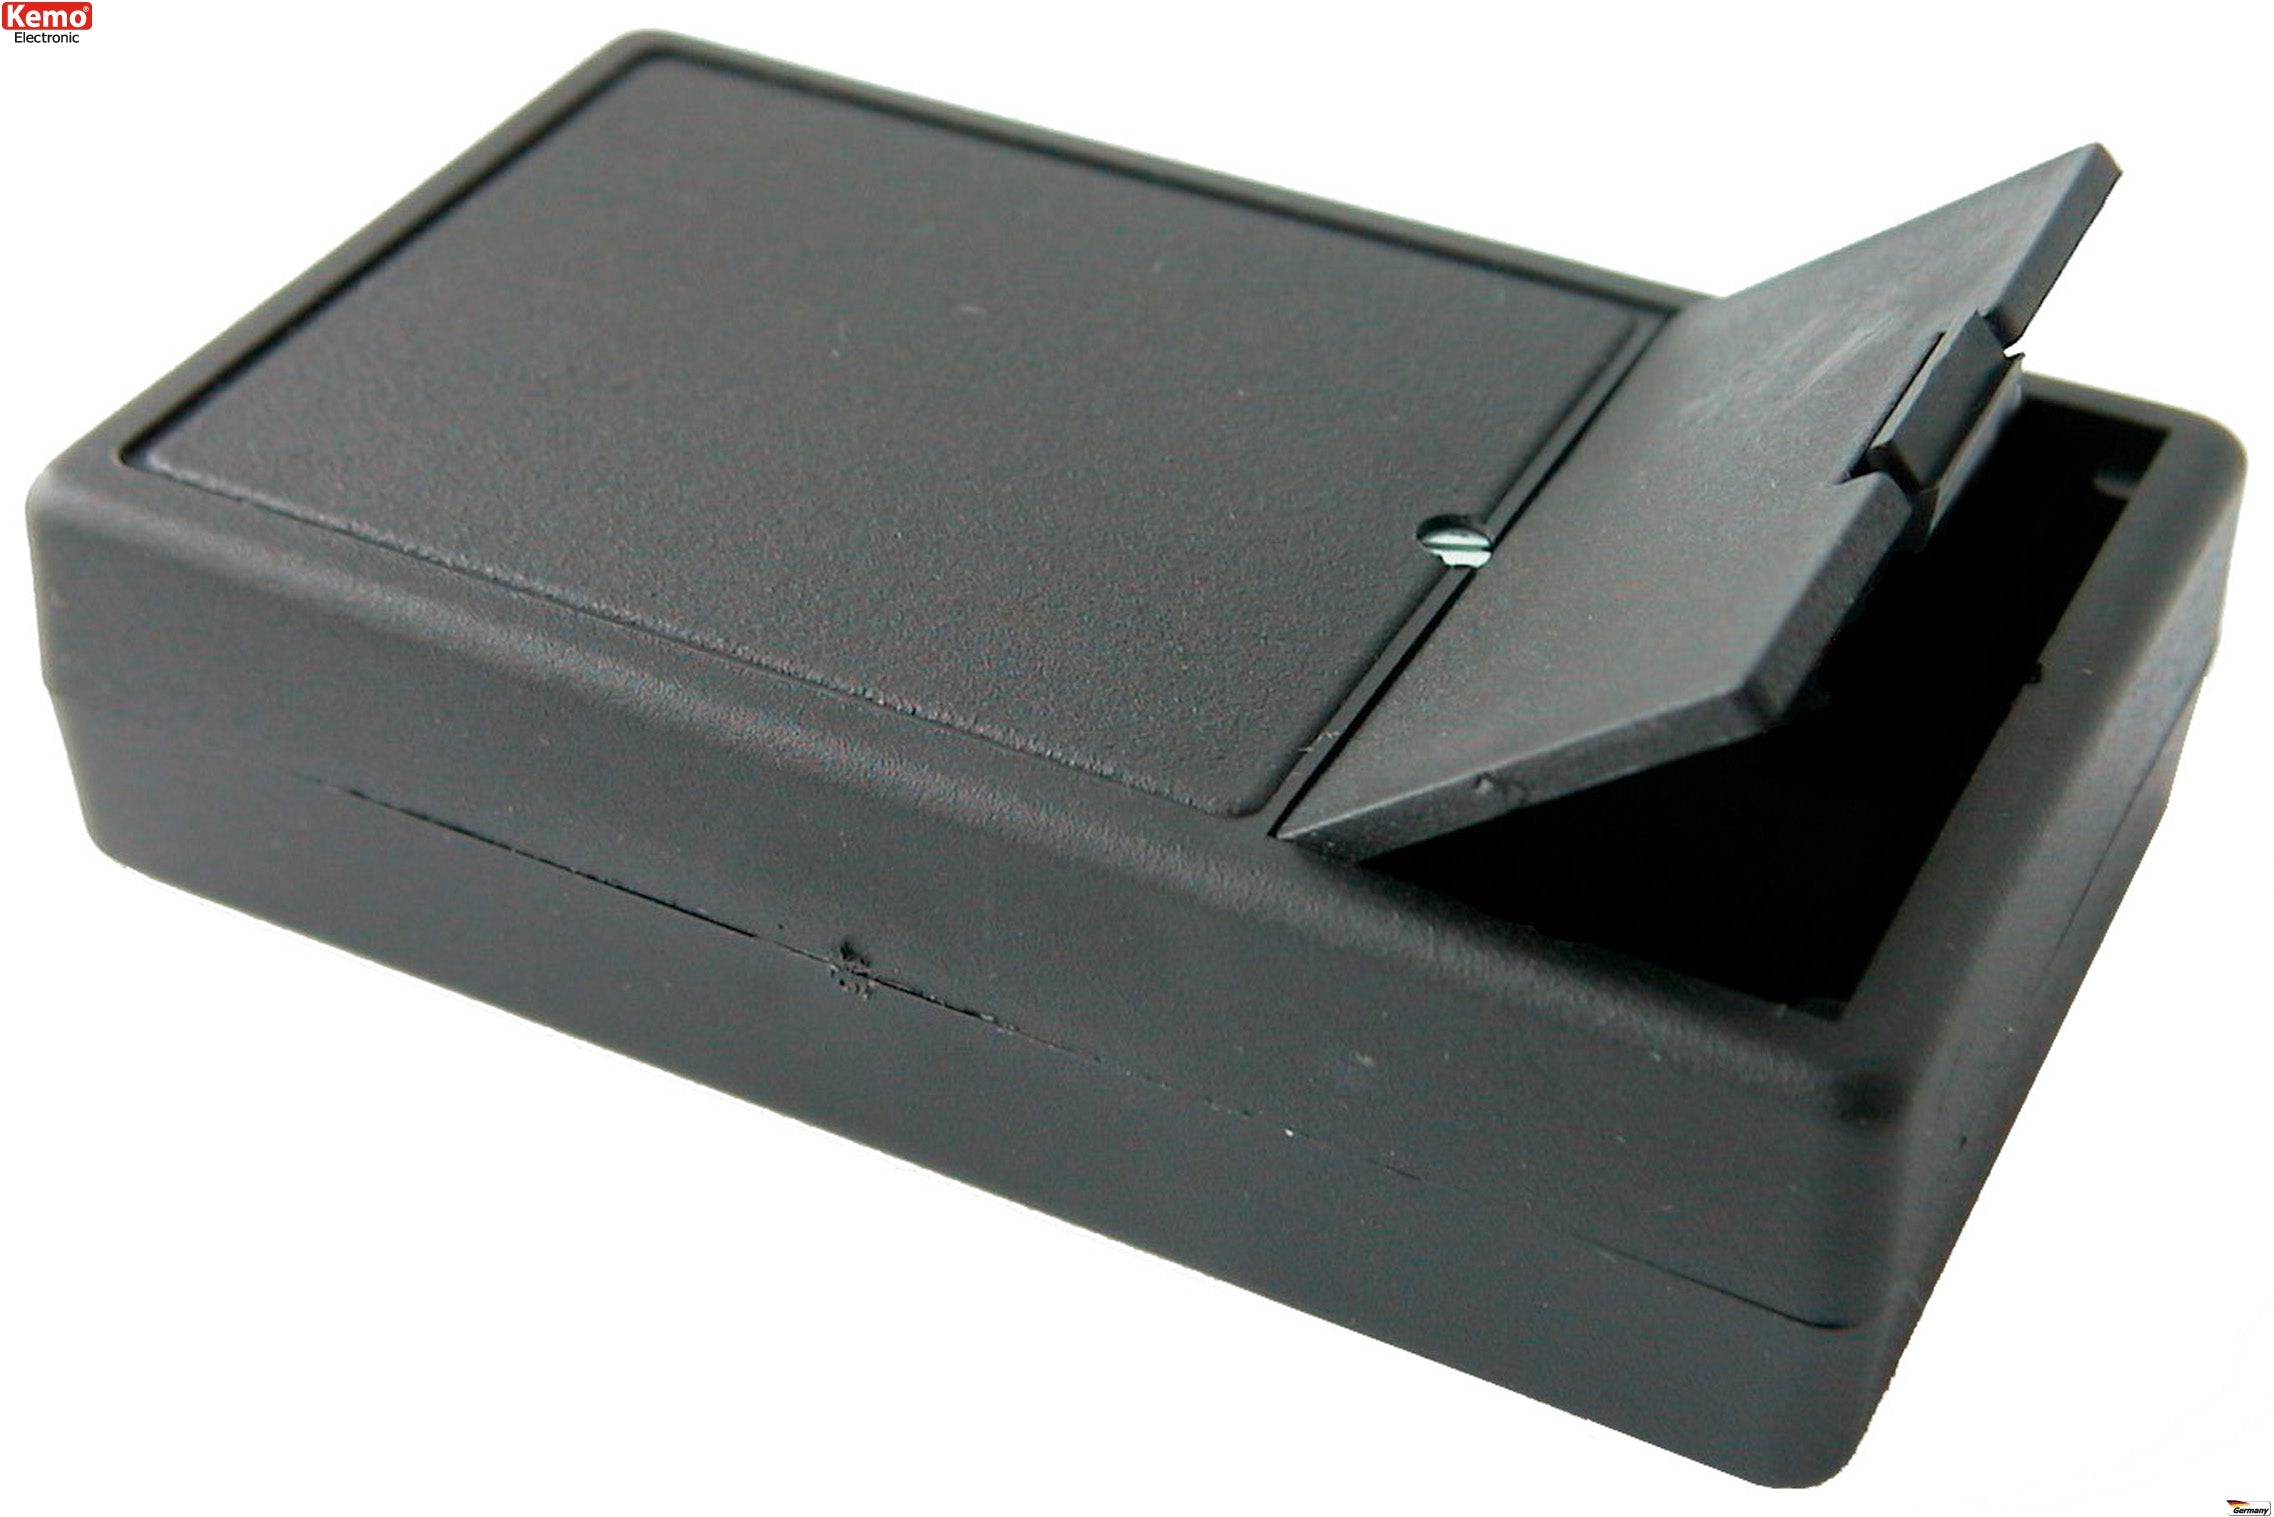 9 V/DC or 2AAA Plastic case, small approx. 102 x 61 x 26 mm G01B Project Enclosure